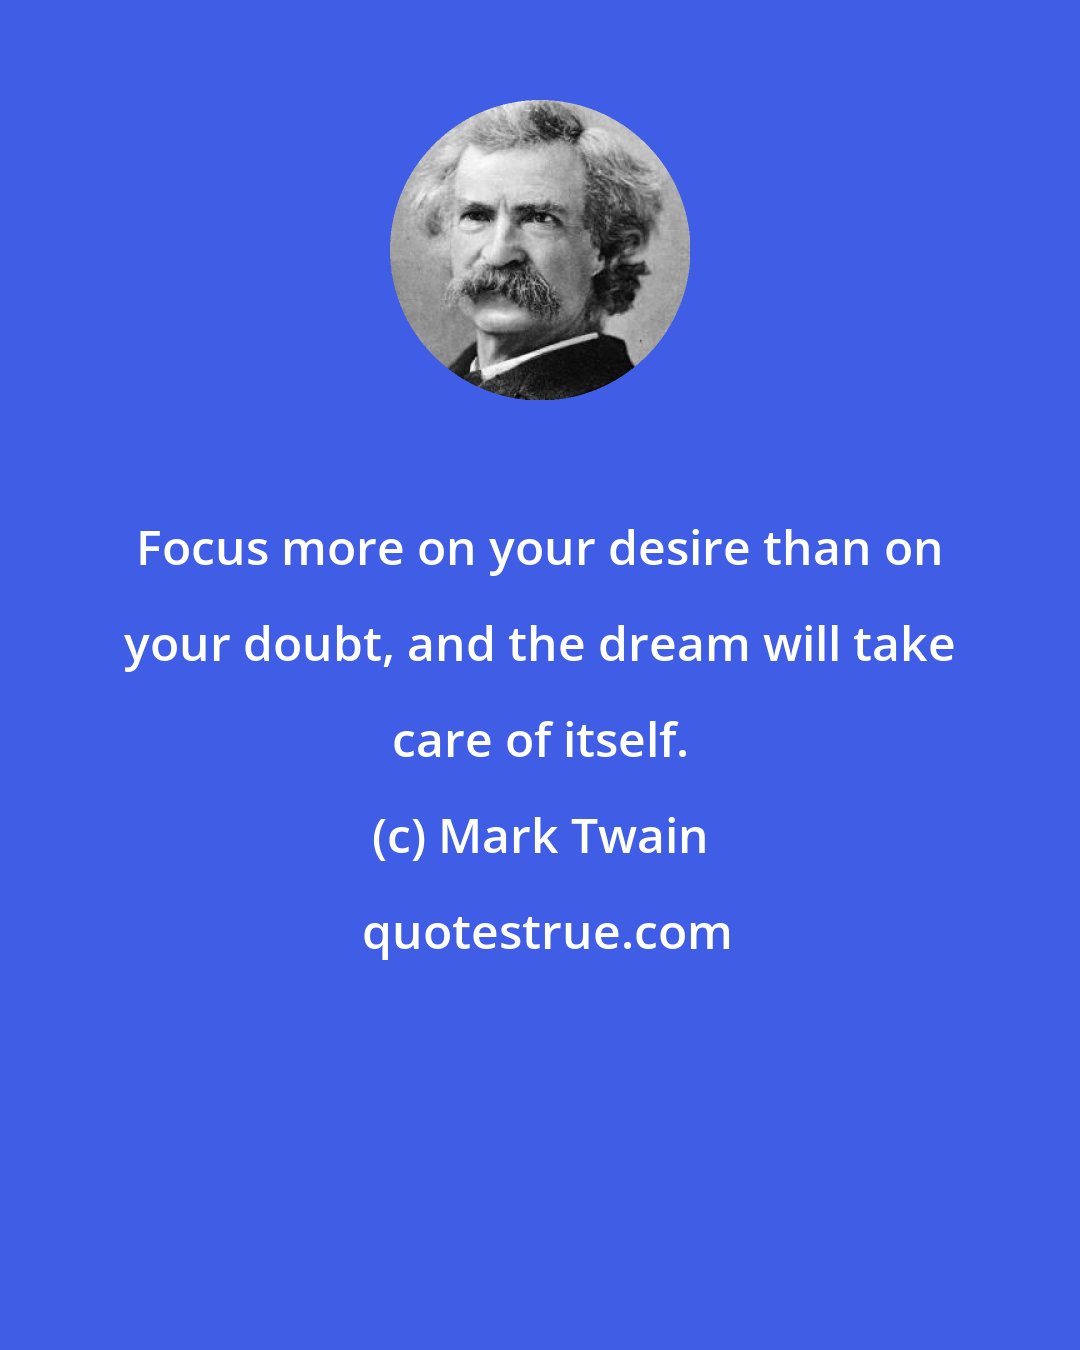 Mark Twain: Focus more on your desire than on your doubt, and the dream will take care of itself.